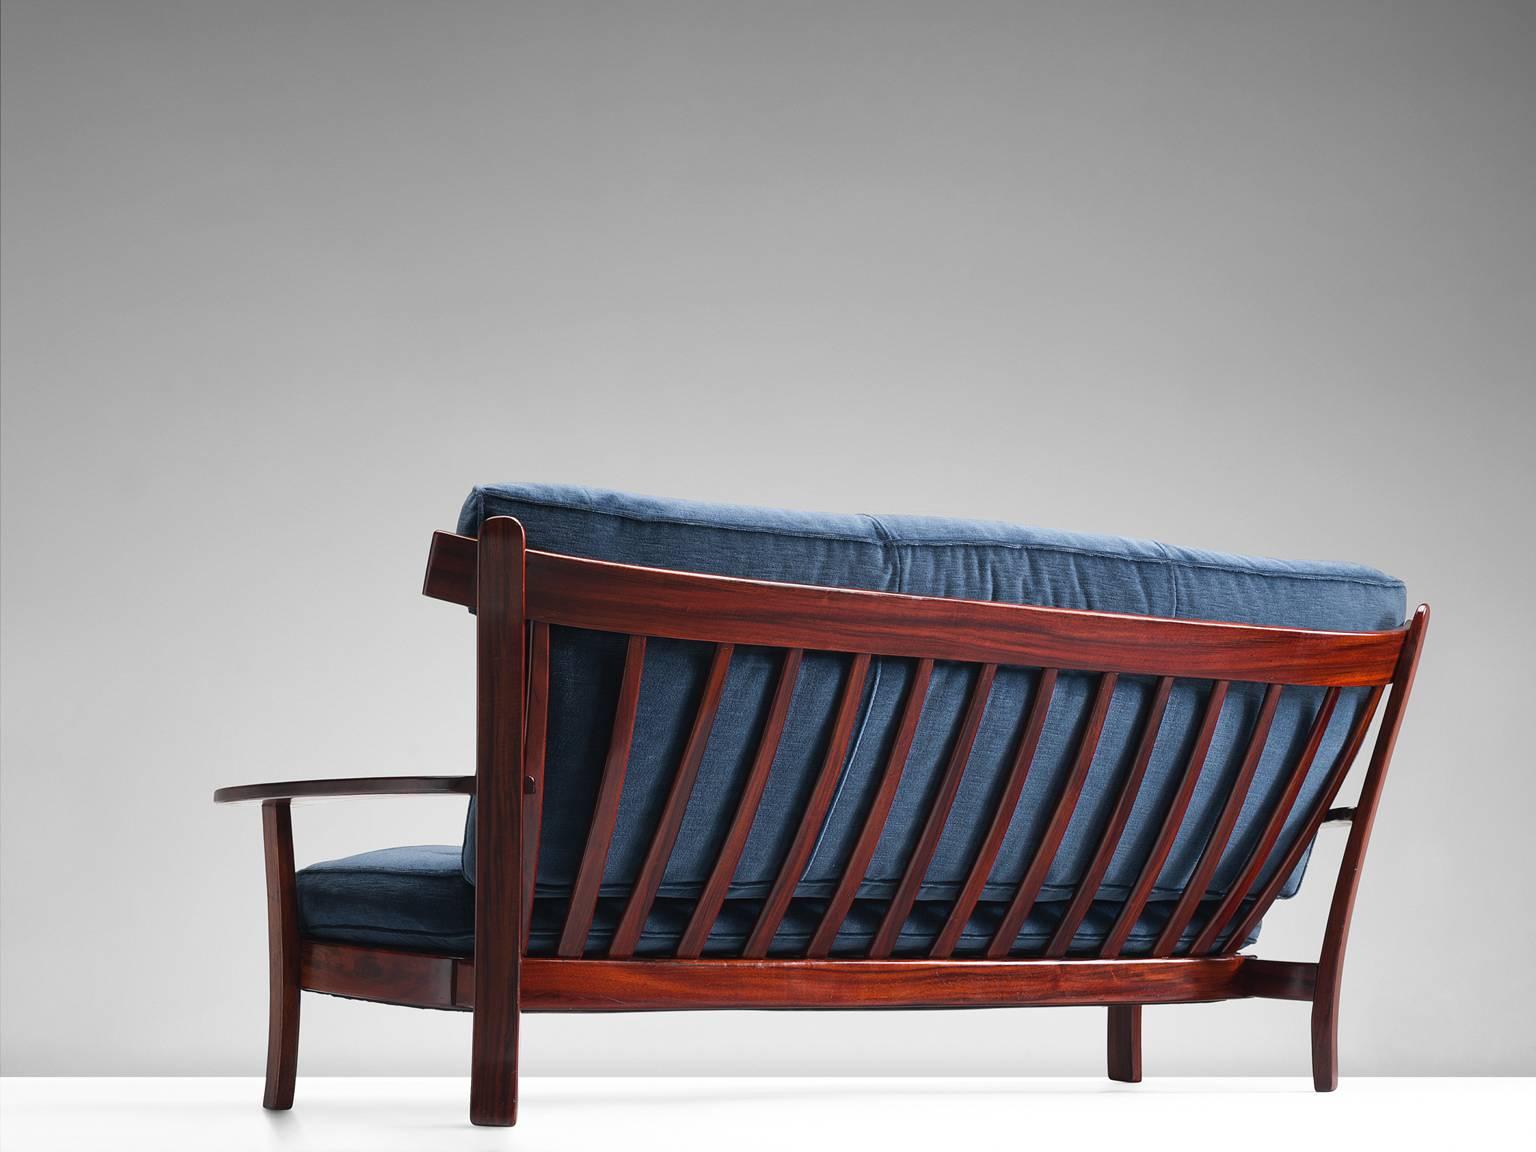 Sofa, rosewood, velvet, Brazilian design, European execution, 1960s.

This settee is executed in Brazilian rosewood and velvet and holds several well-constructed details such as the slatted back and the use of slender and delicate slats of rosewood